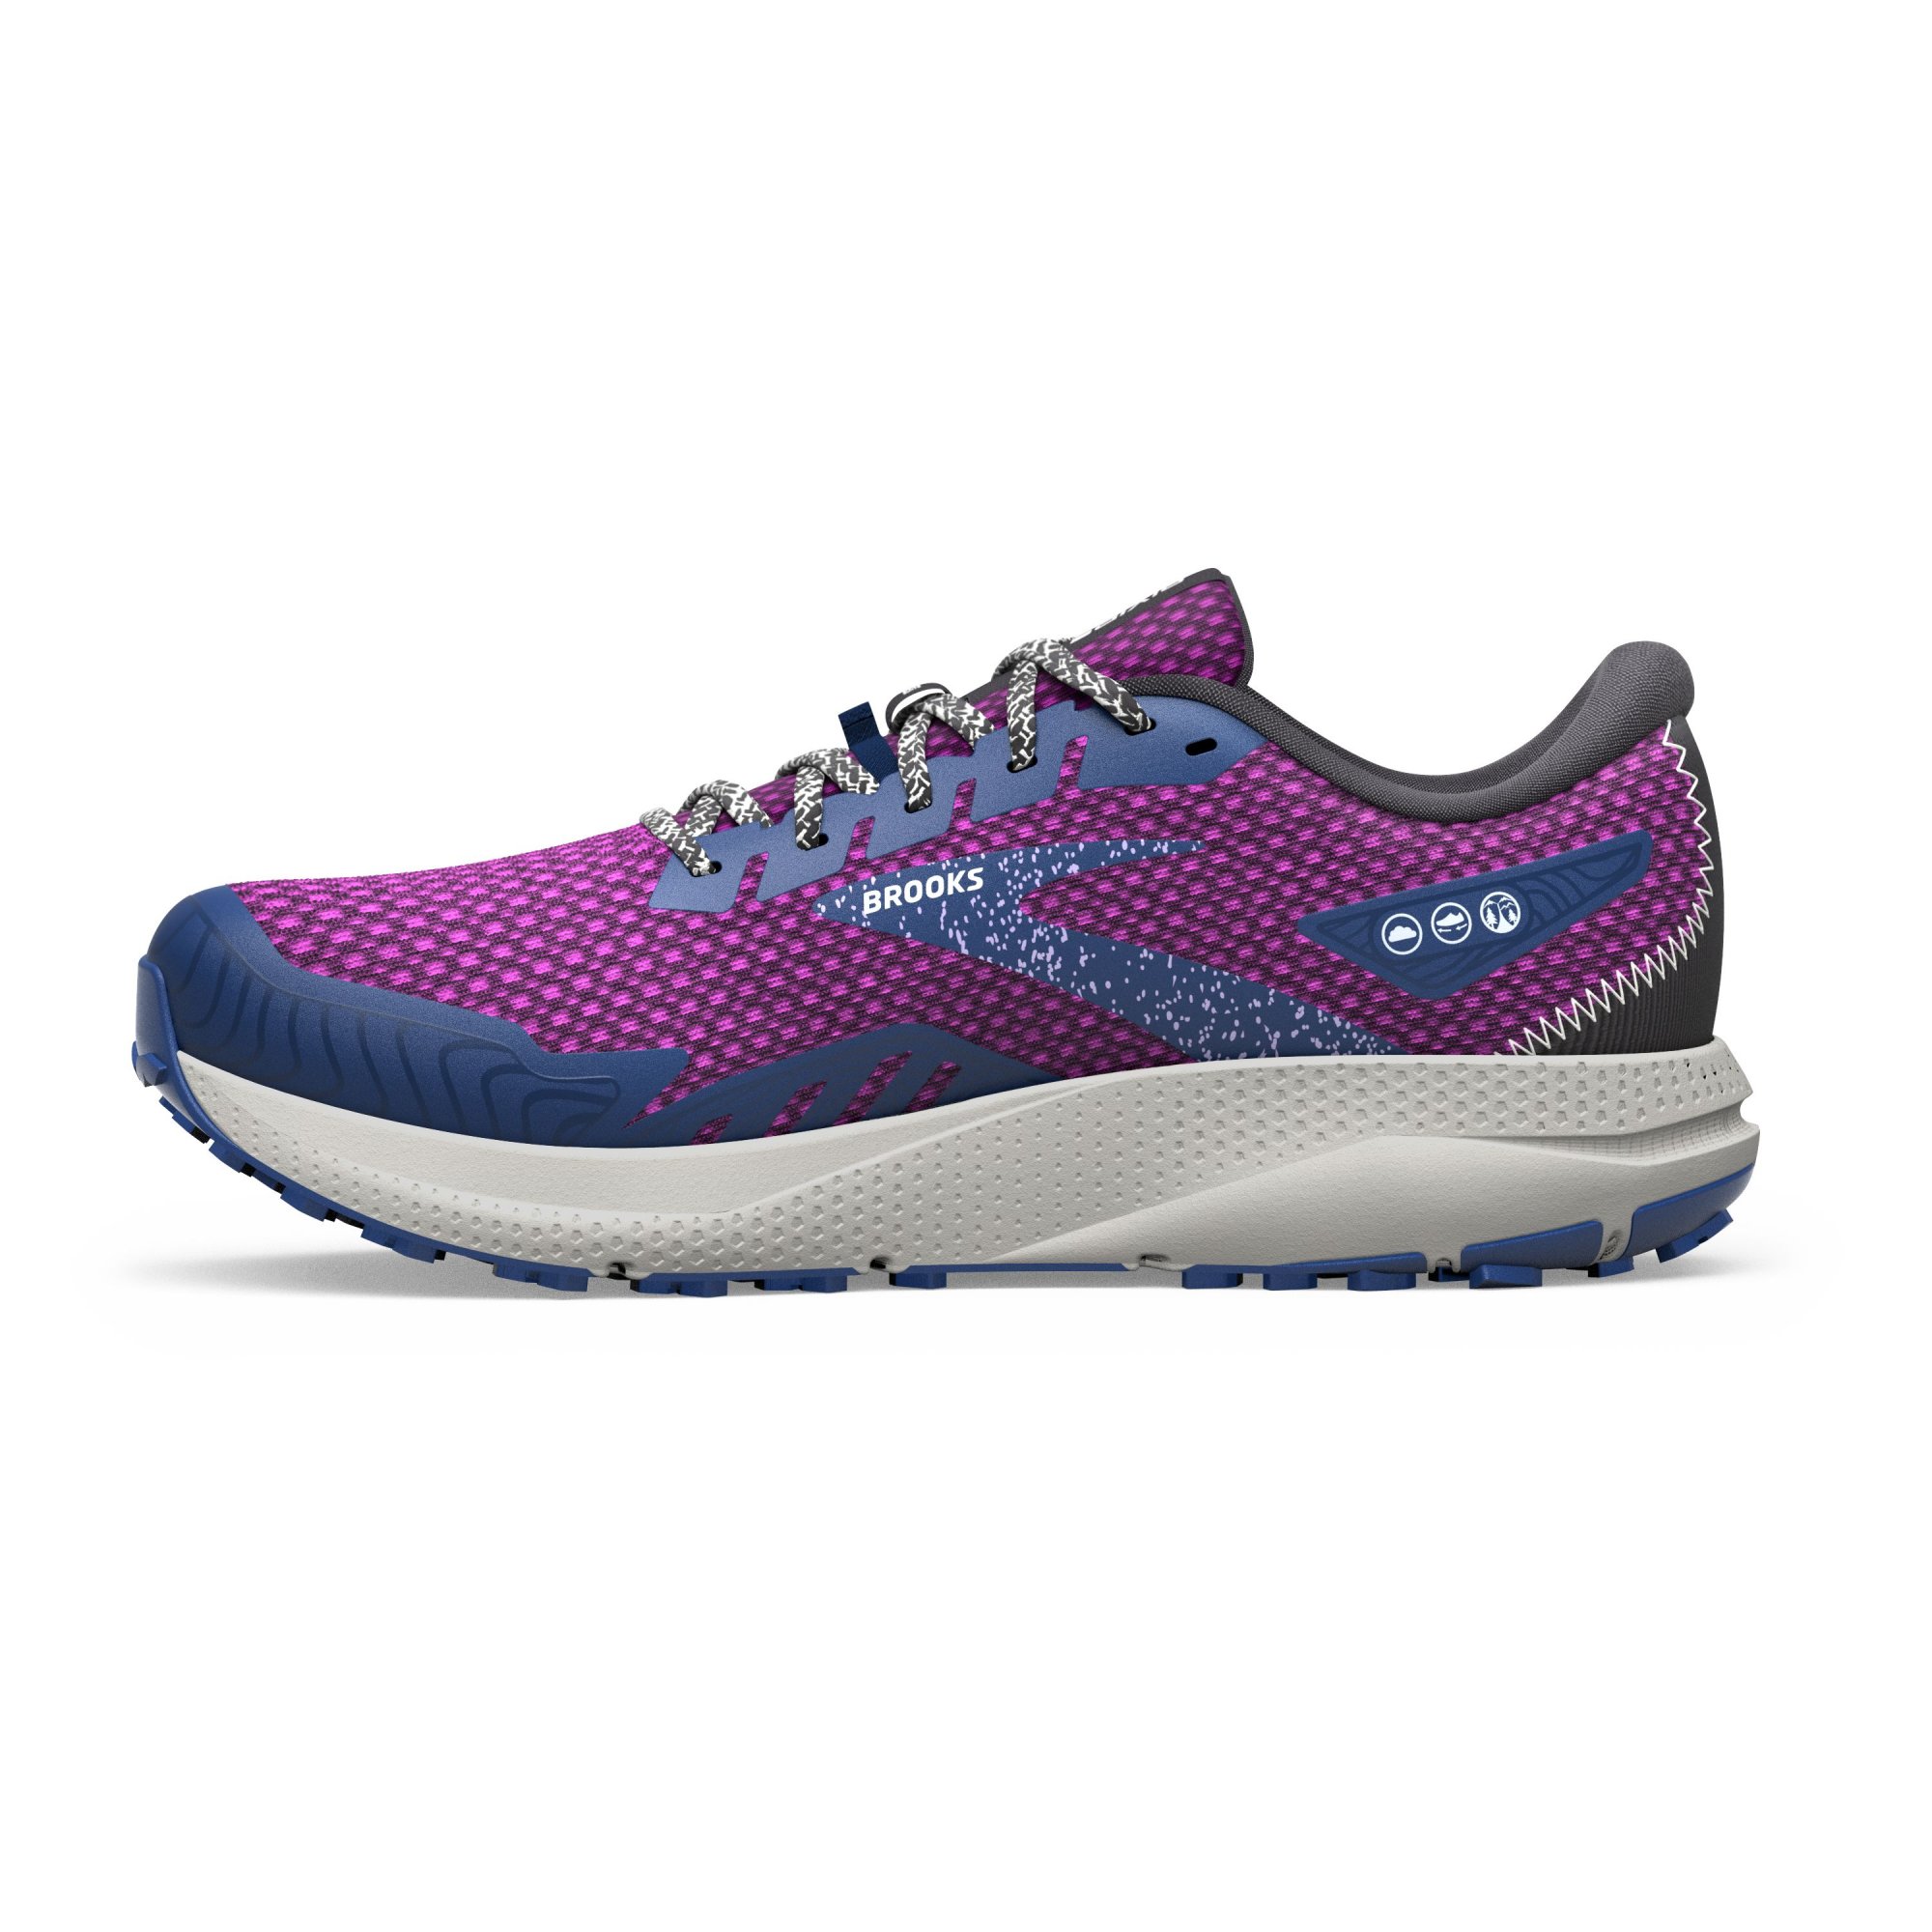 BROOKS Divide 4 W Purple/Navy/Oyster new